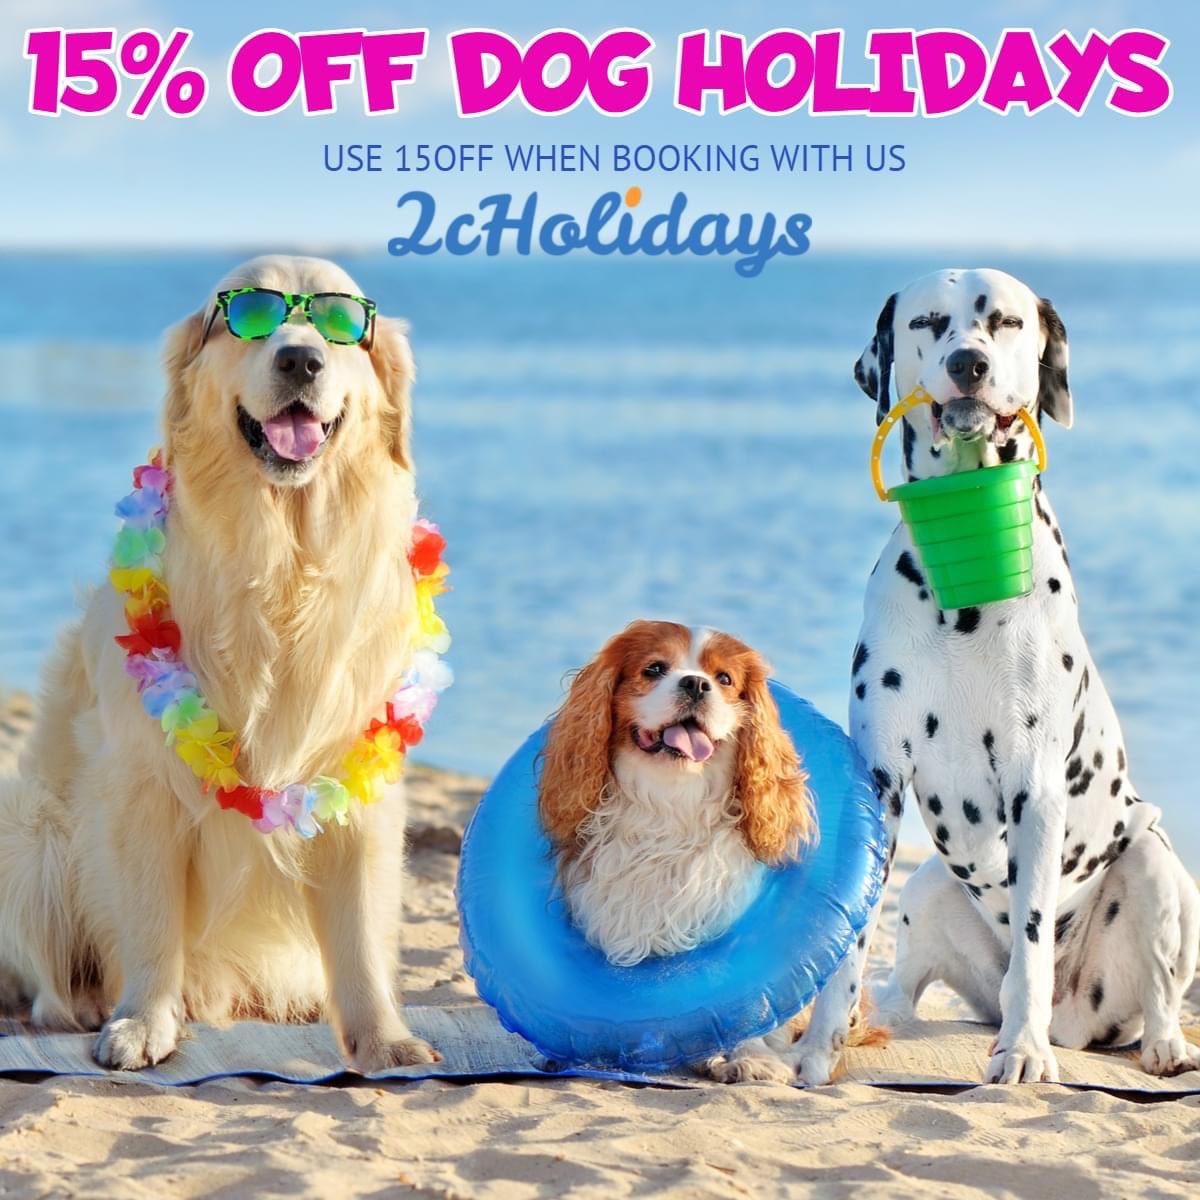 🐩🐶🐕🐕🐶Looking for a holiday that is dog friendly? You'll find the pawfect holiday for you and your dog with 2cHolidays.#dogholidays #petfriendly #holidayseason #holidayswithdogs #dalmation #dogsonabeach #pooch #seasideuk #dogfriendlybeaches #holidayswithdogs #doggo #pawfect